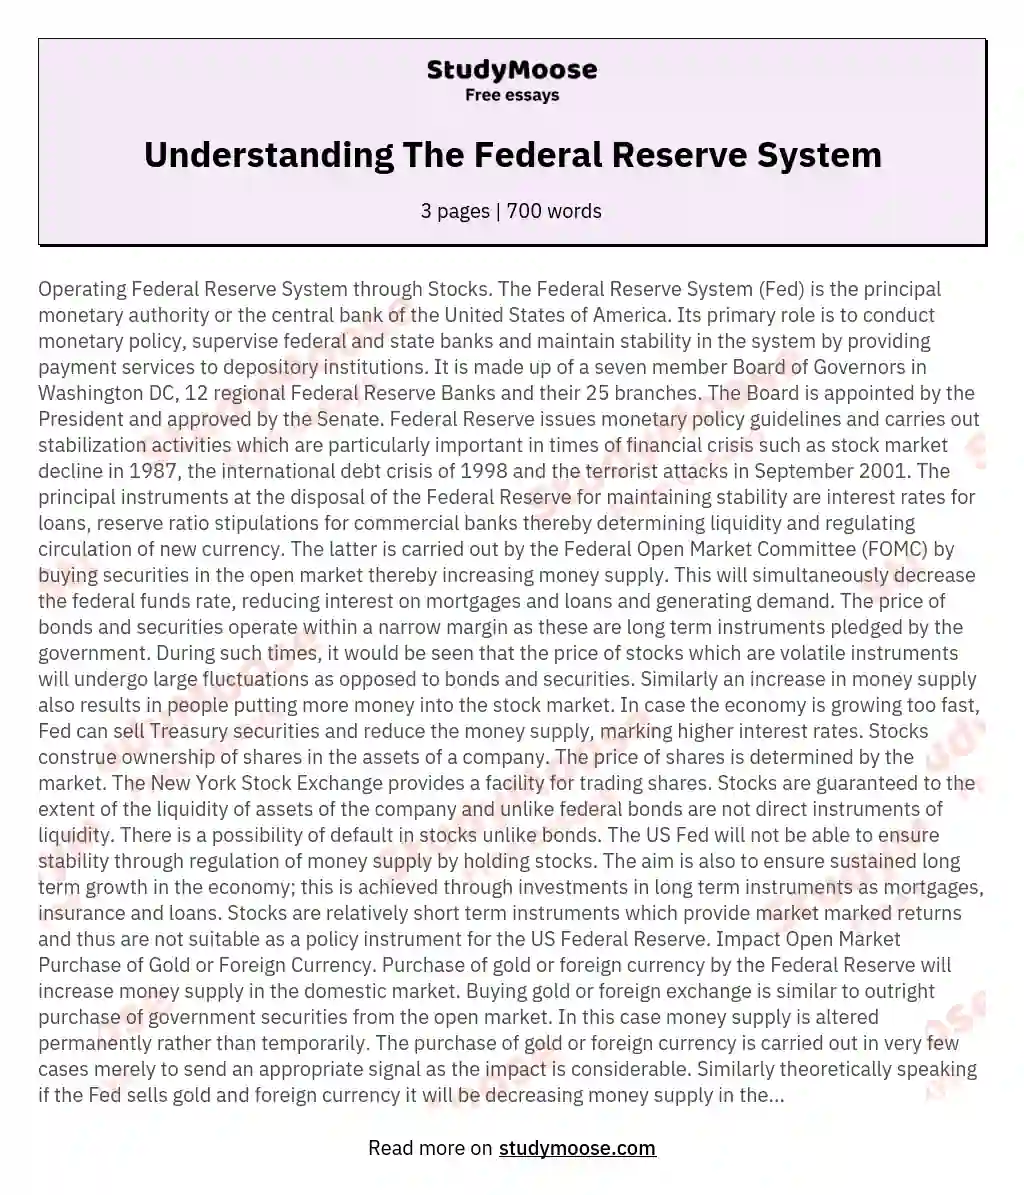 Understanding The Federal Reserve System essay